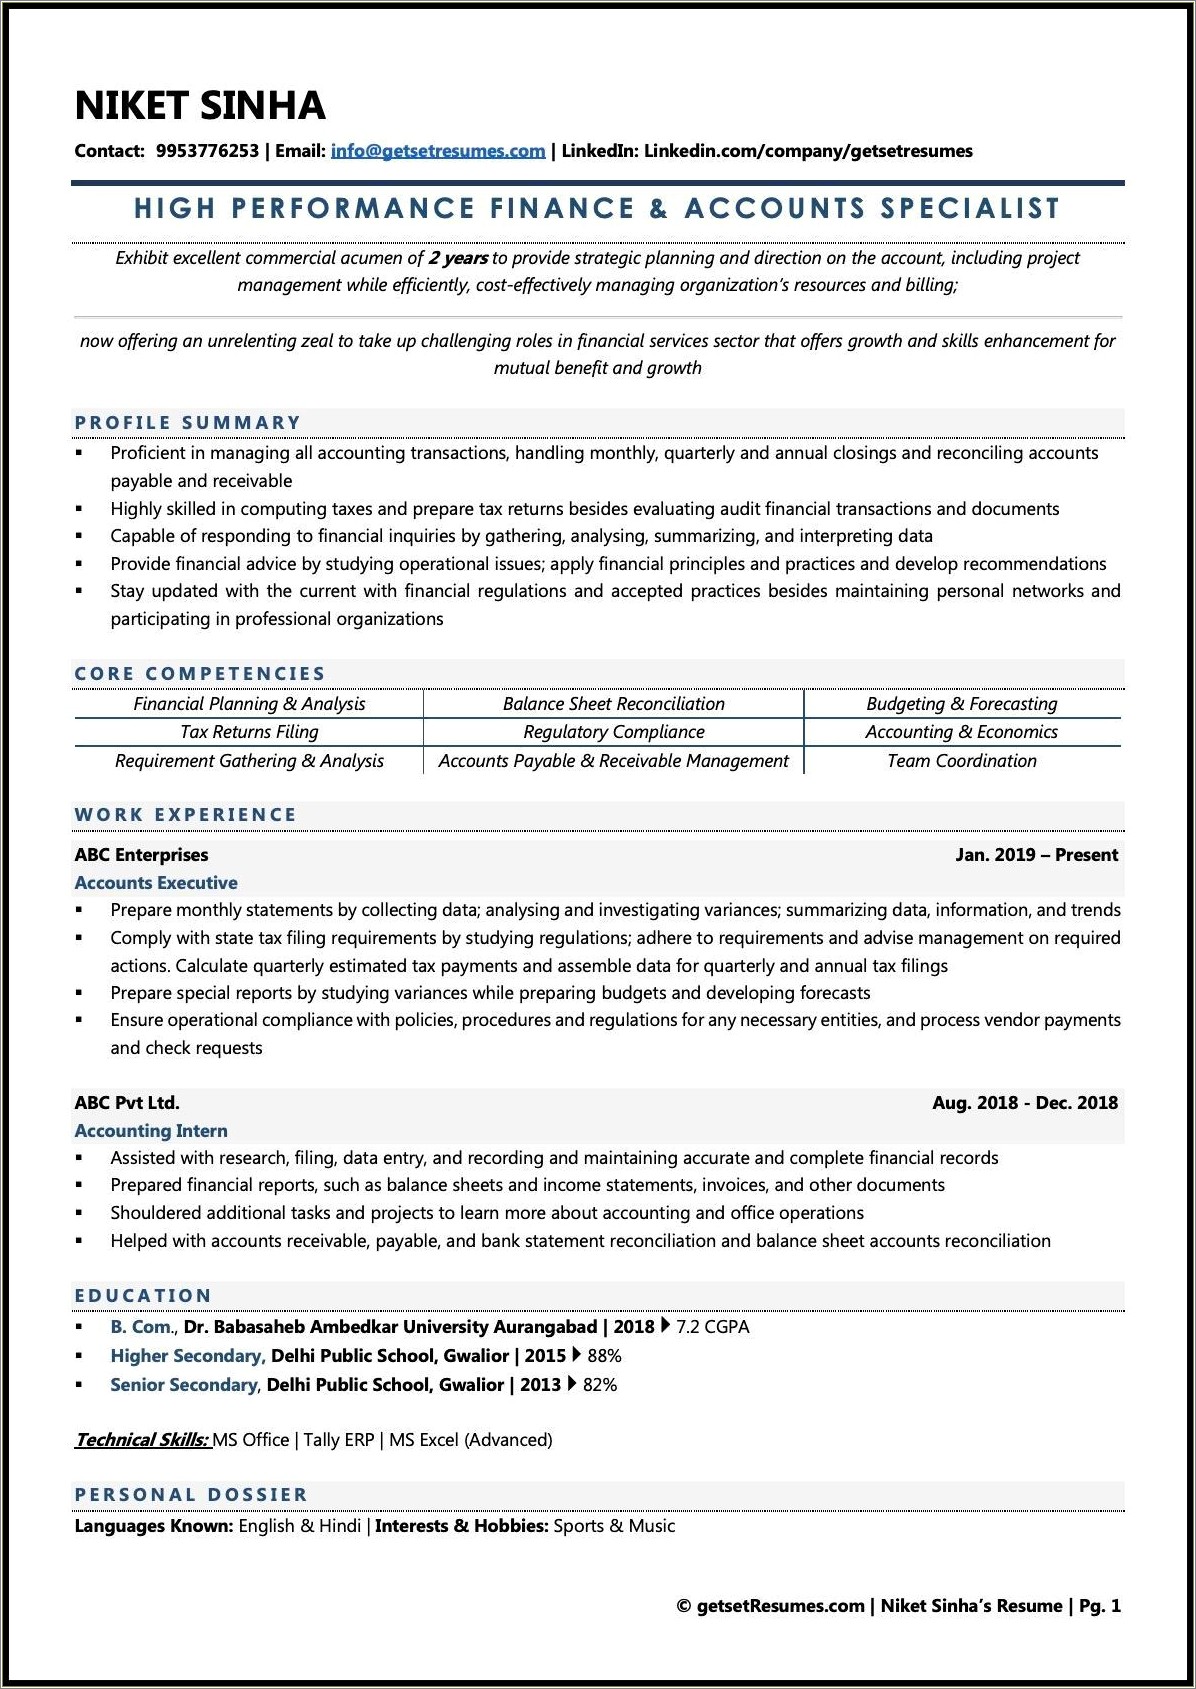 Resume Objective Statements For Staff Accounts